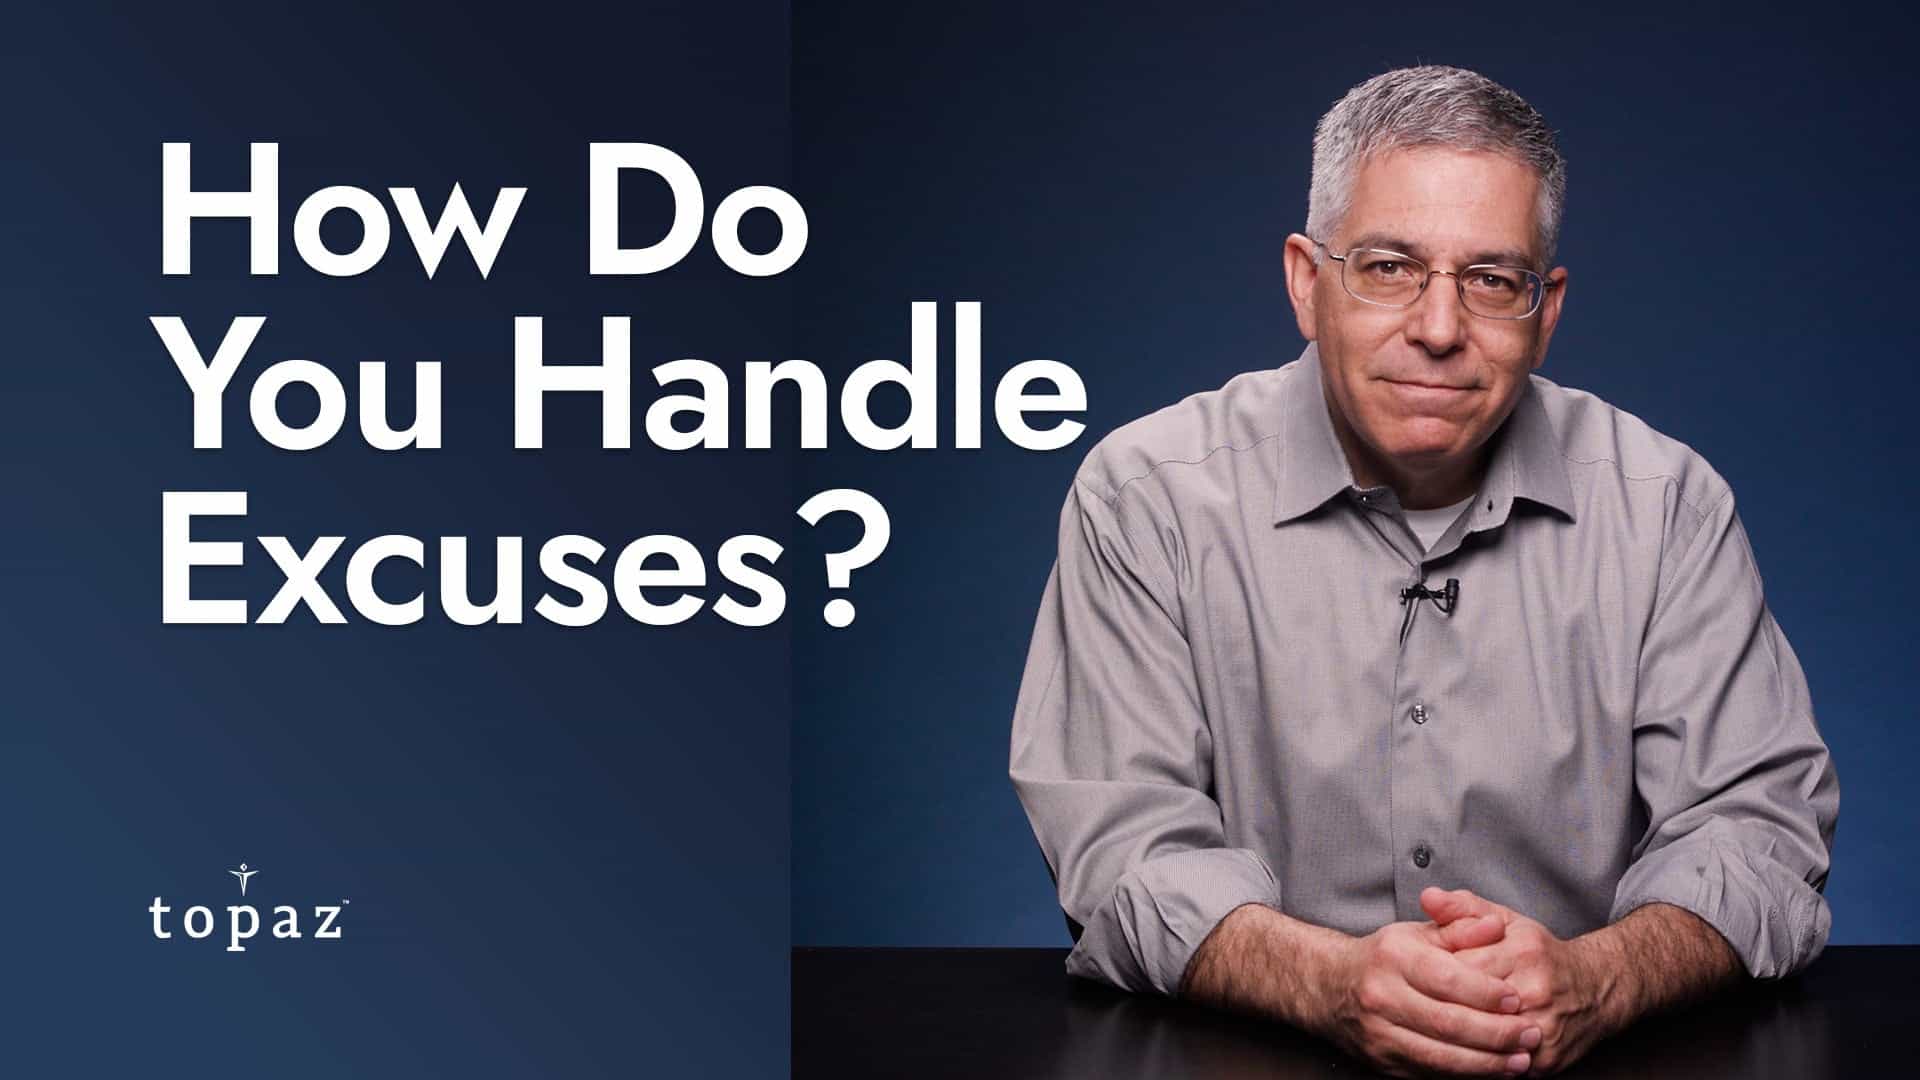 Jorge Chavez at a Desk with Headline: How Do You Handle Excuses?